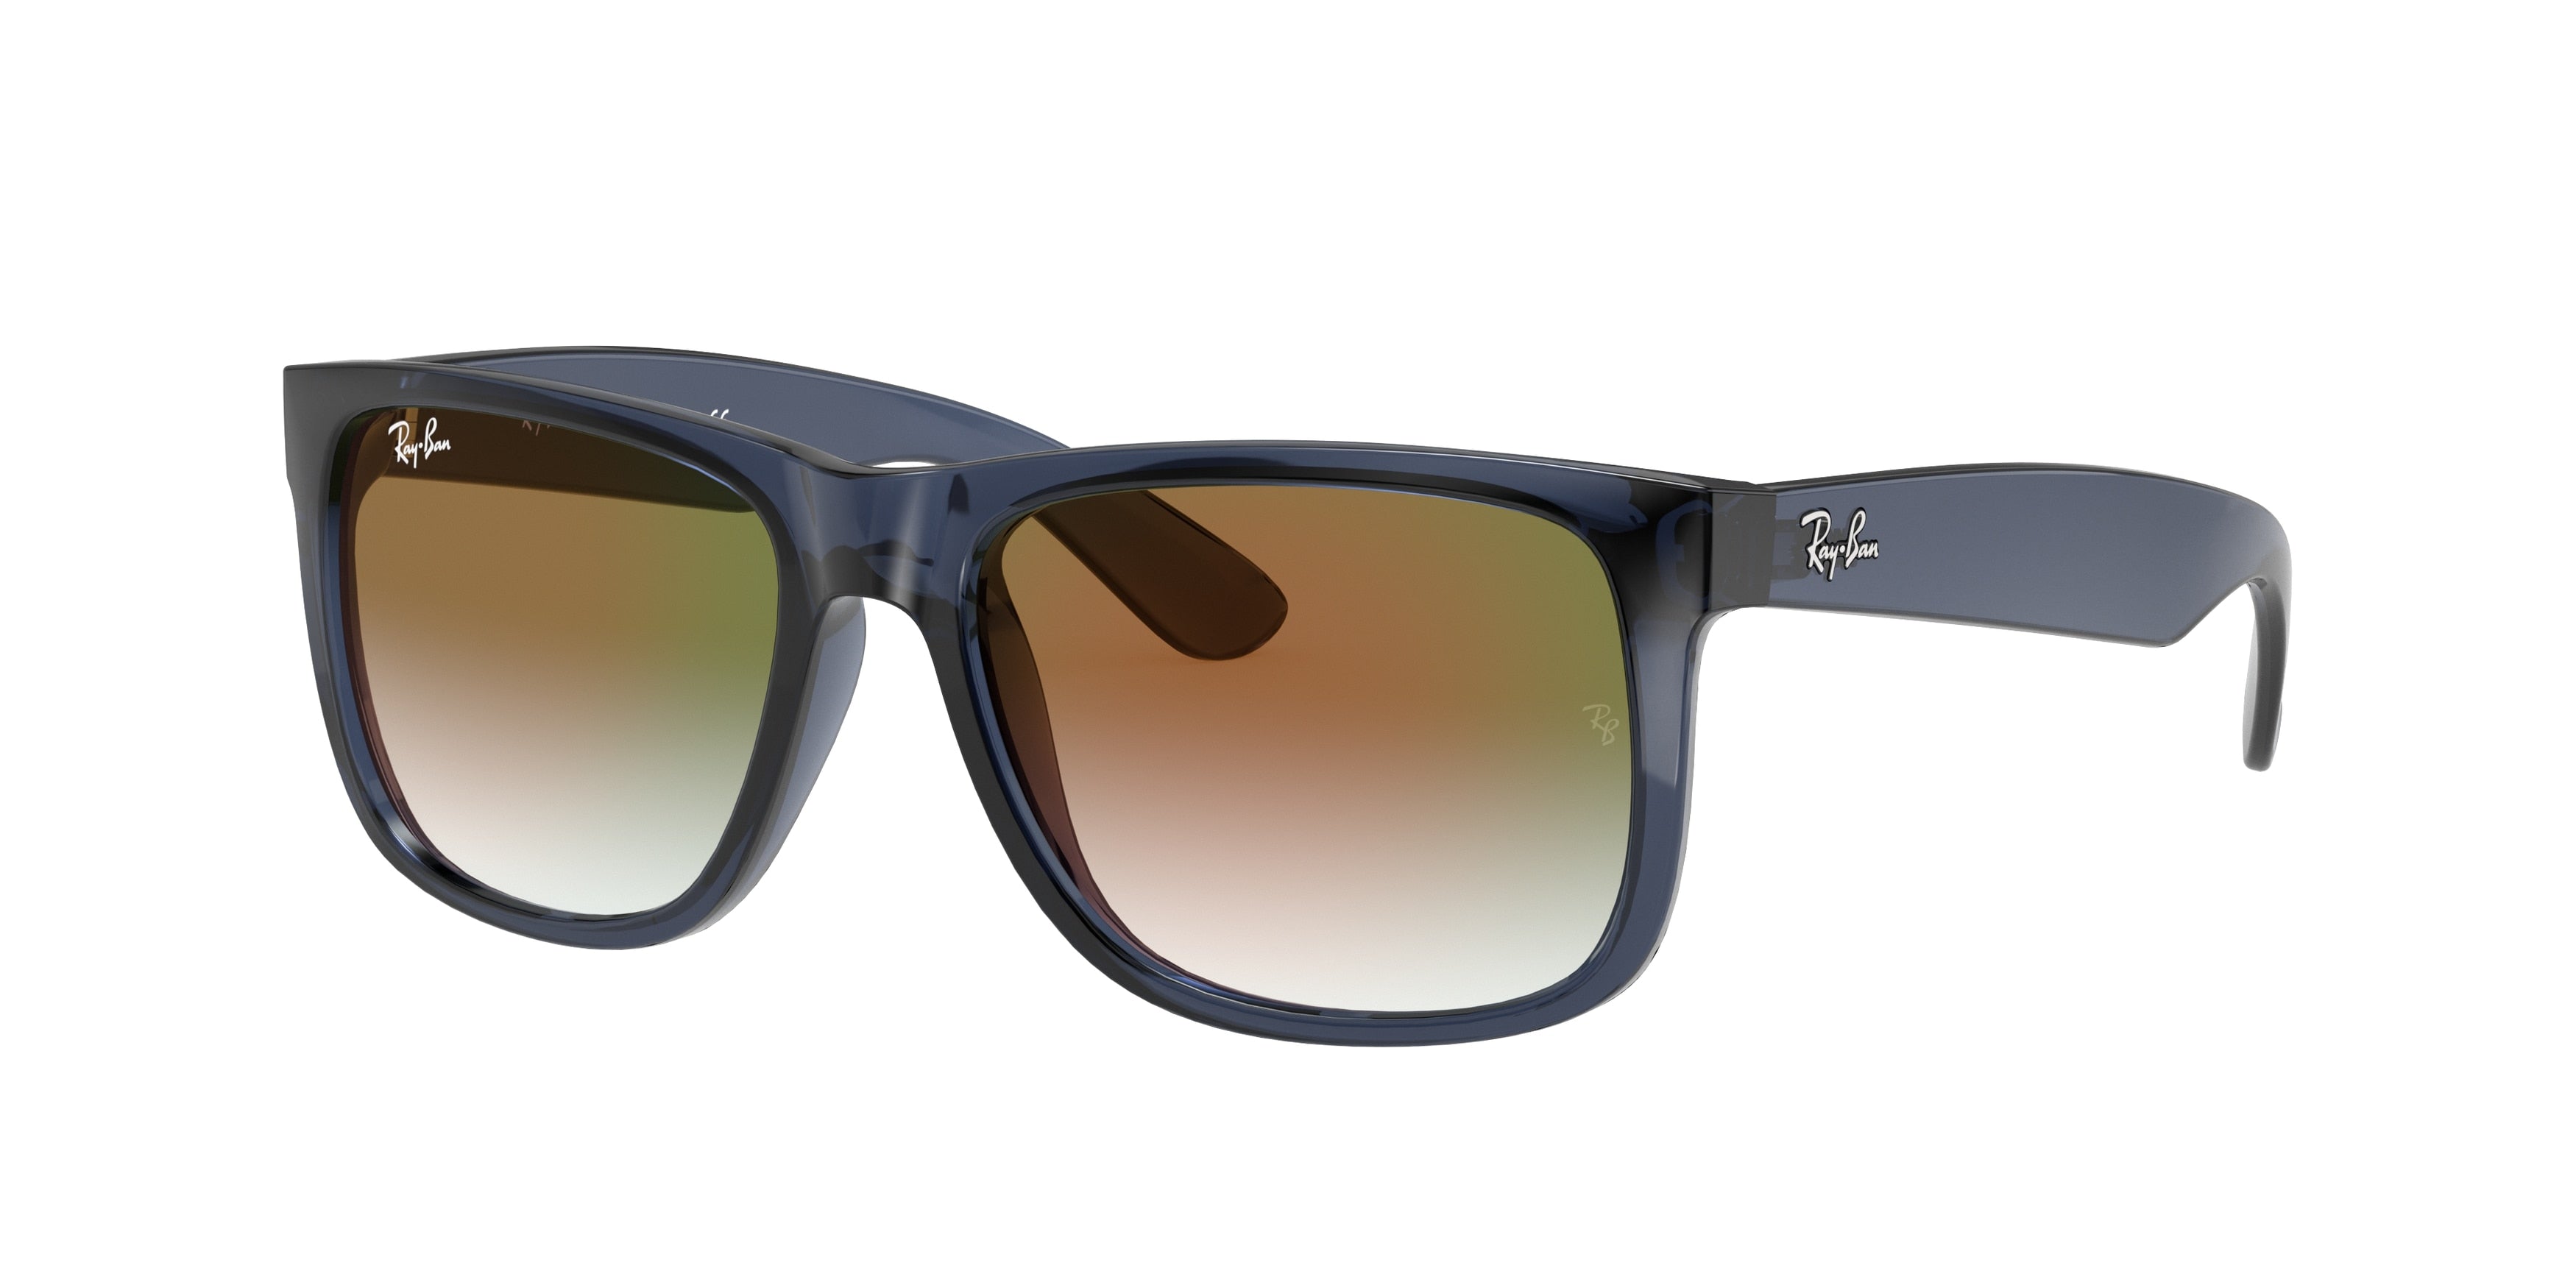 Ray-Ban JUSTIN RB4165 Square Sunglasses  6341T0-Transparent Blue 50-145-16 - Color Map Blue